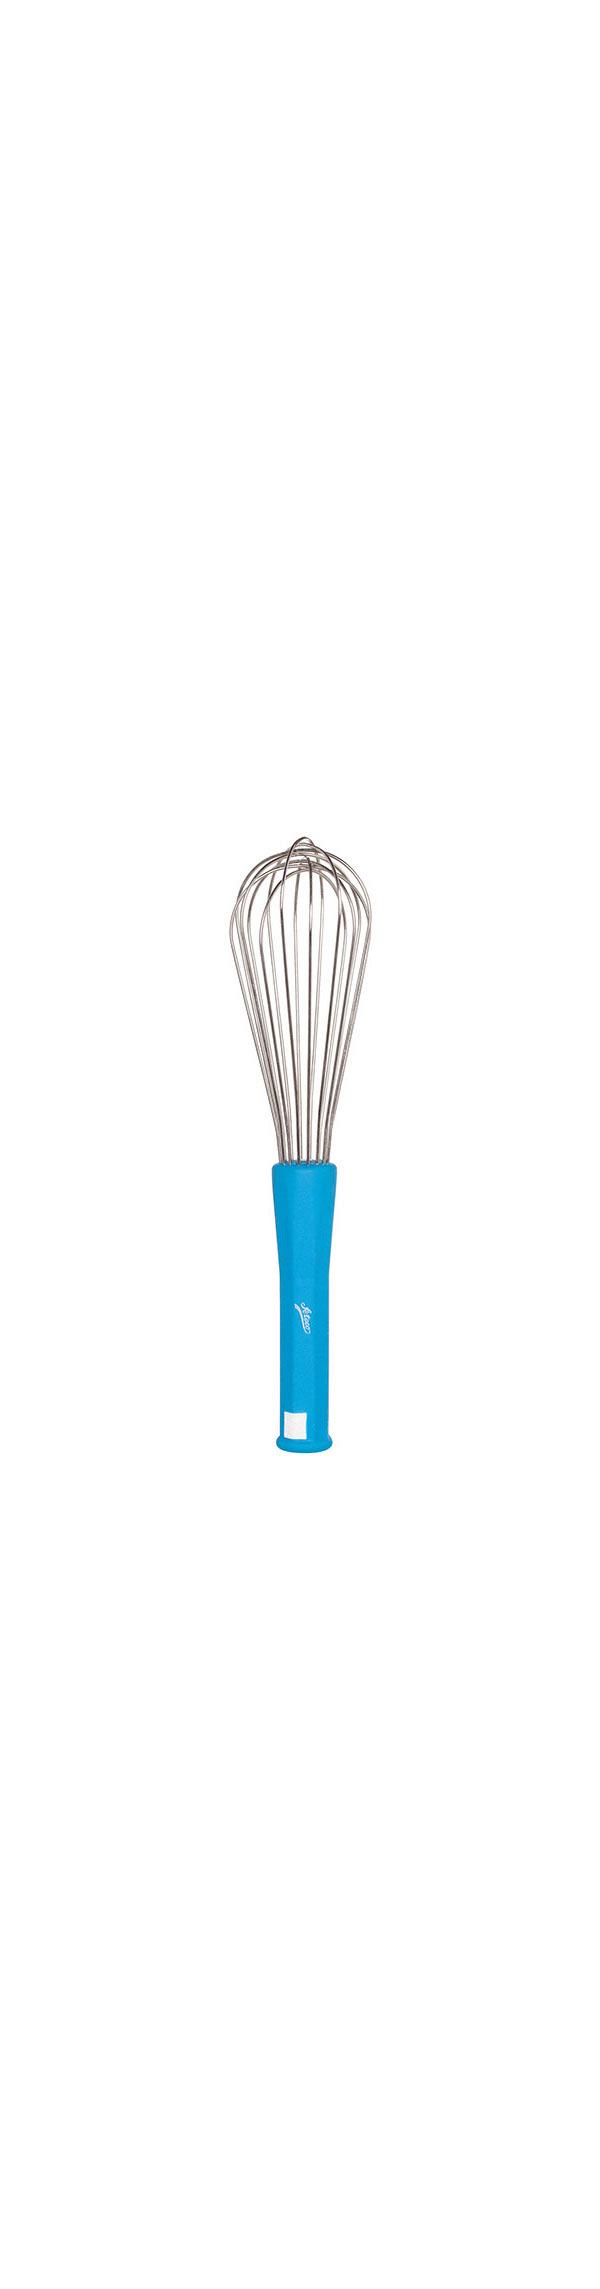 35cm Whisk by Ateco 600